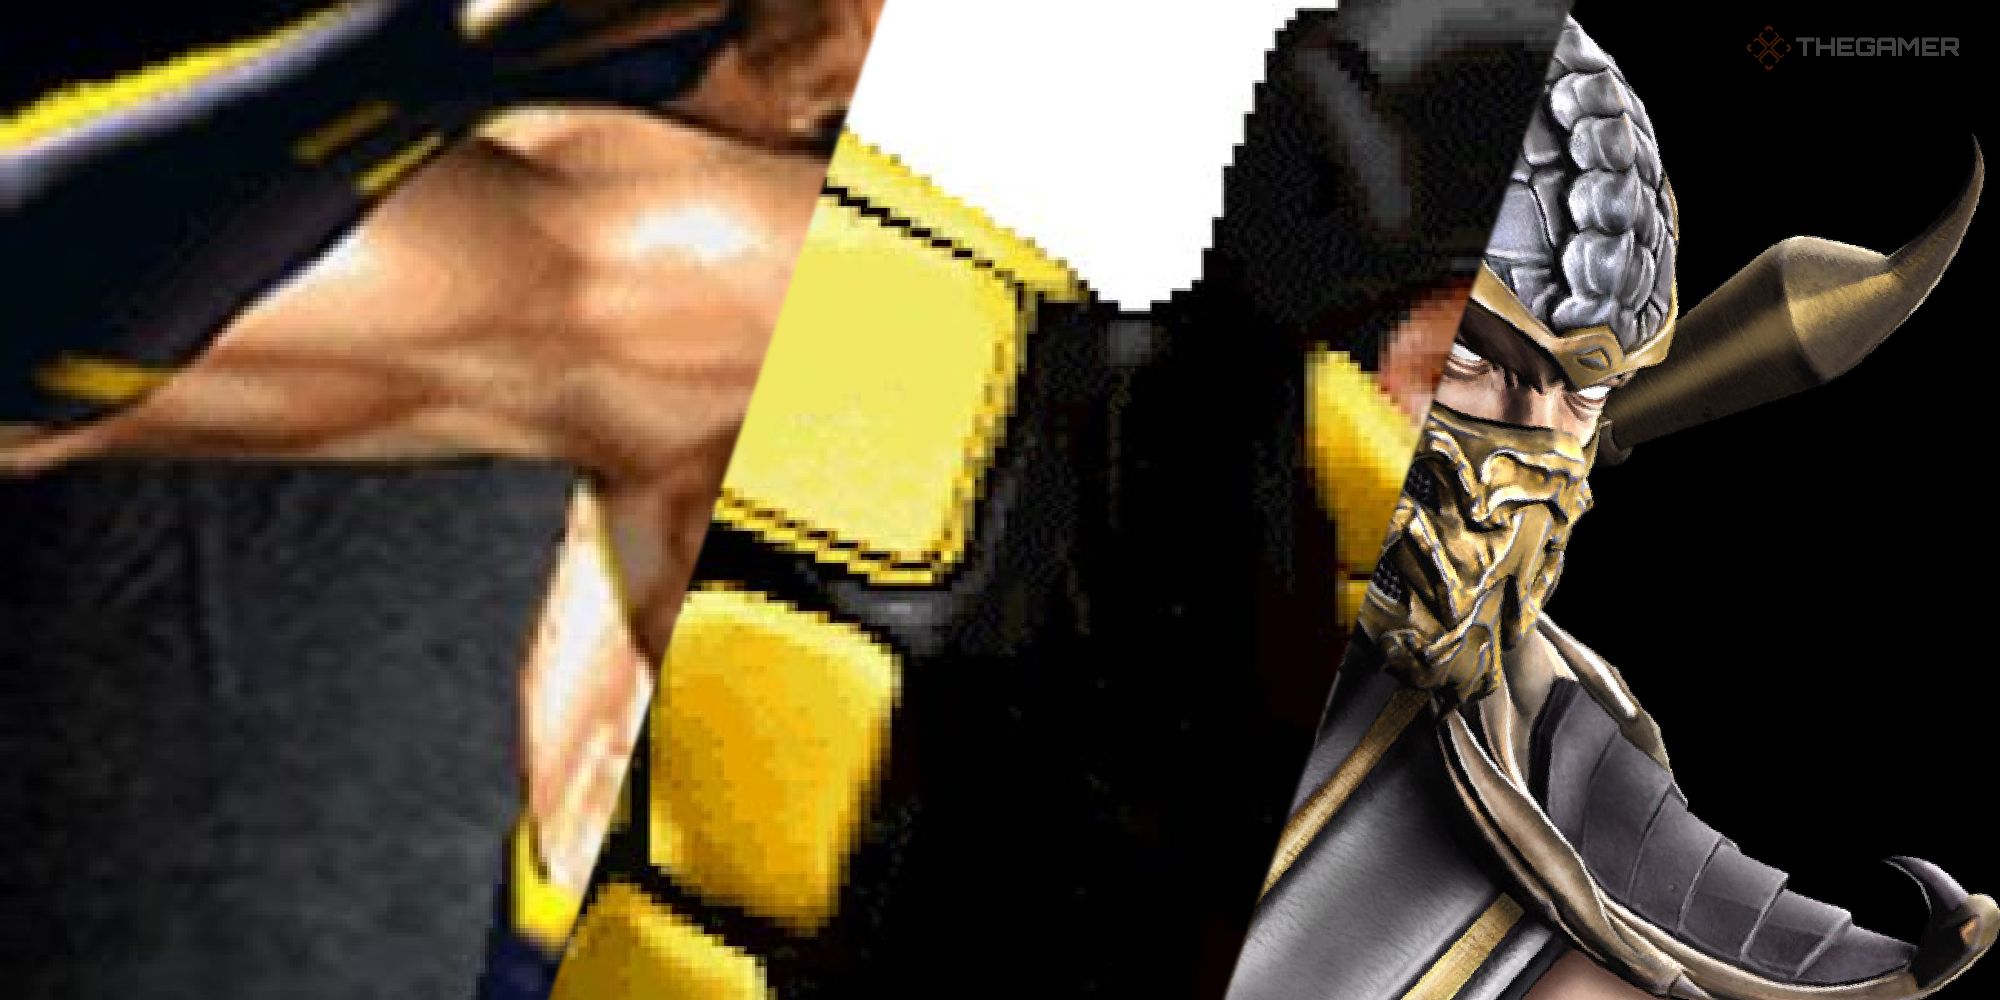 Mortal Kombat explained: Everything you need to know before the